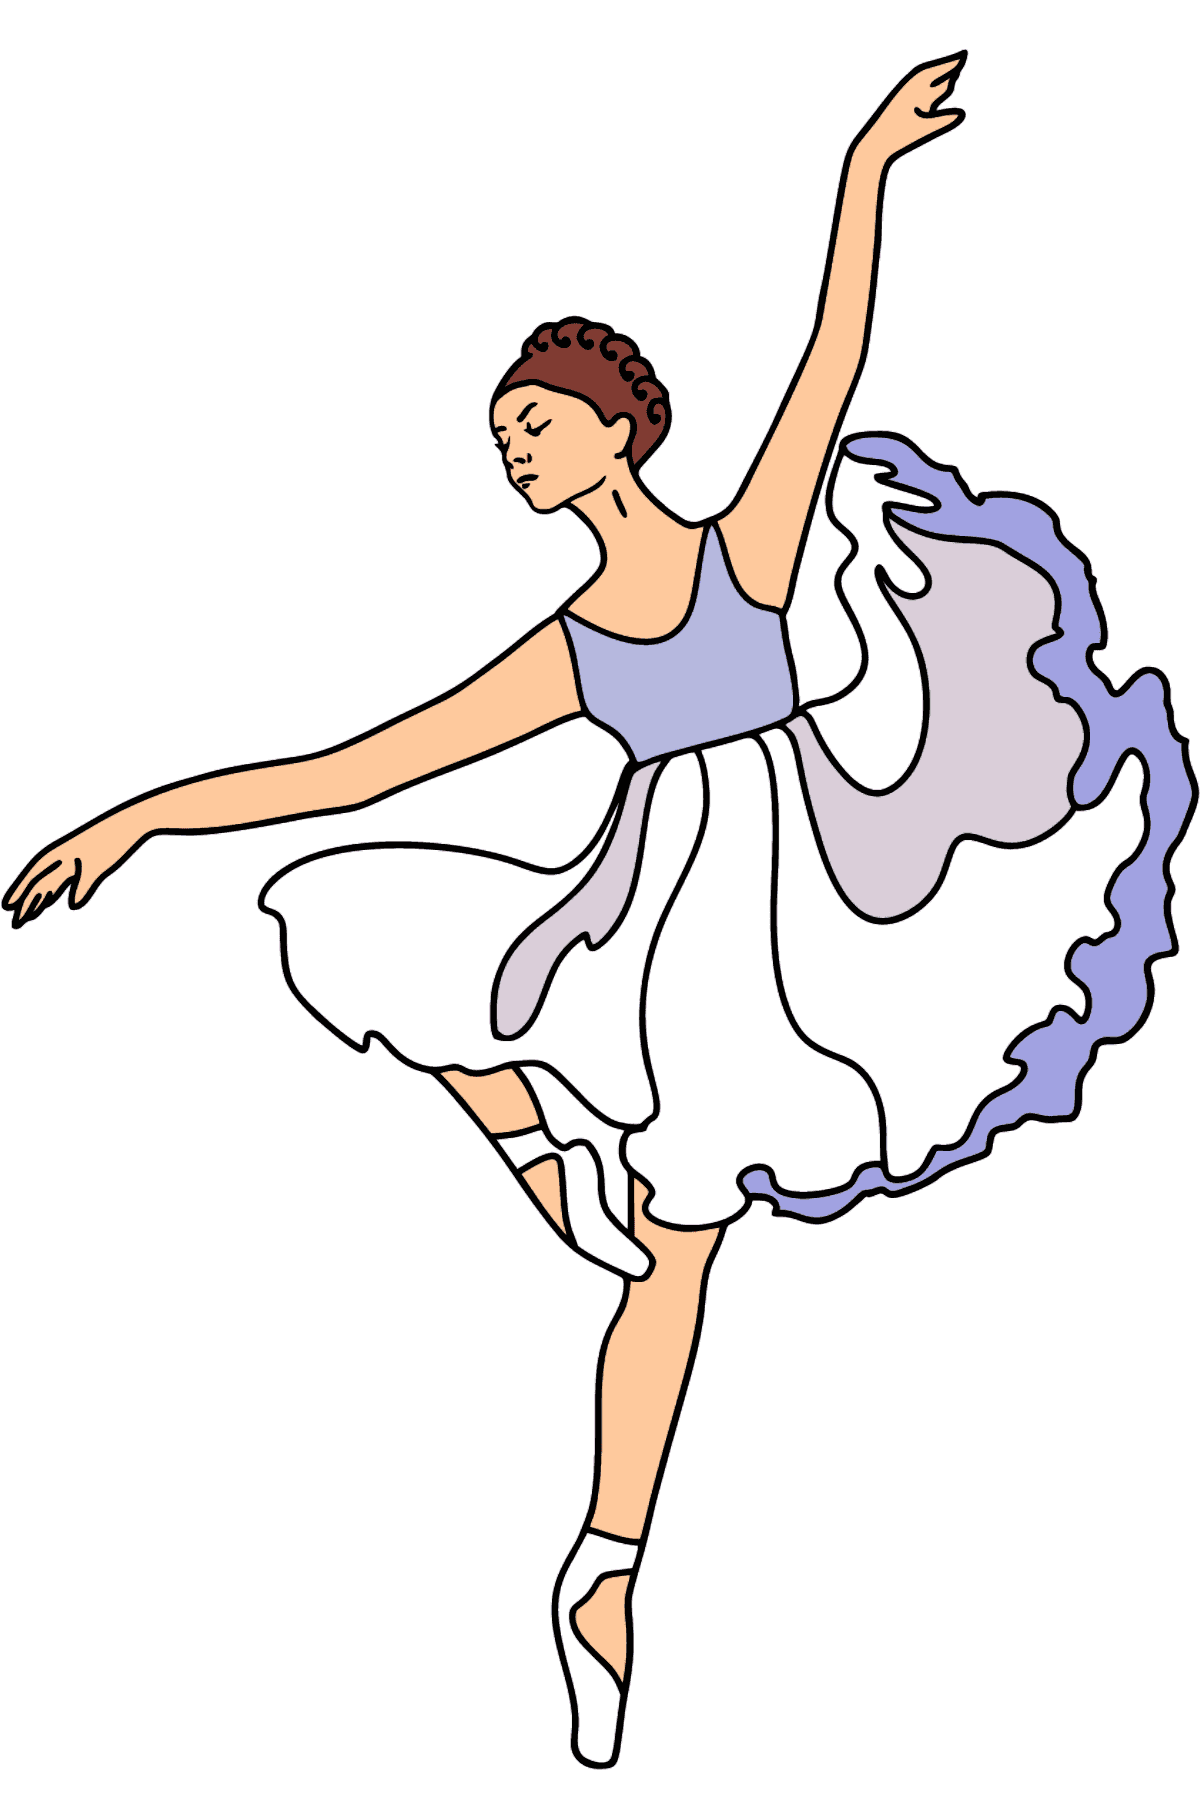 Ballerina in Lilac Dress coloring page - Coloring Pages for Kids